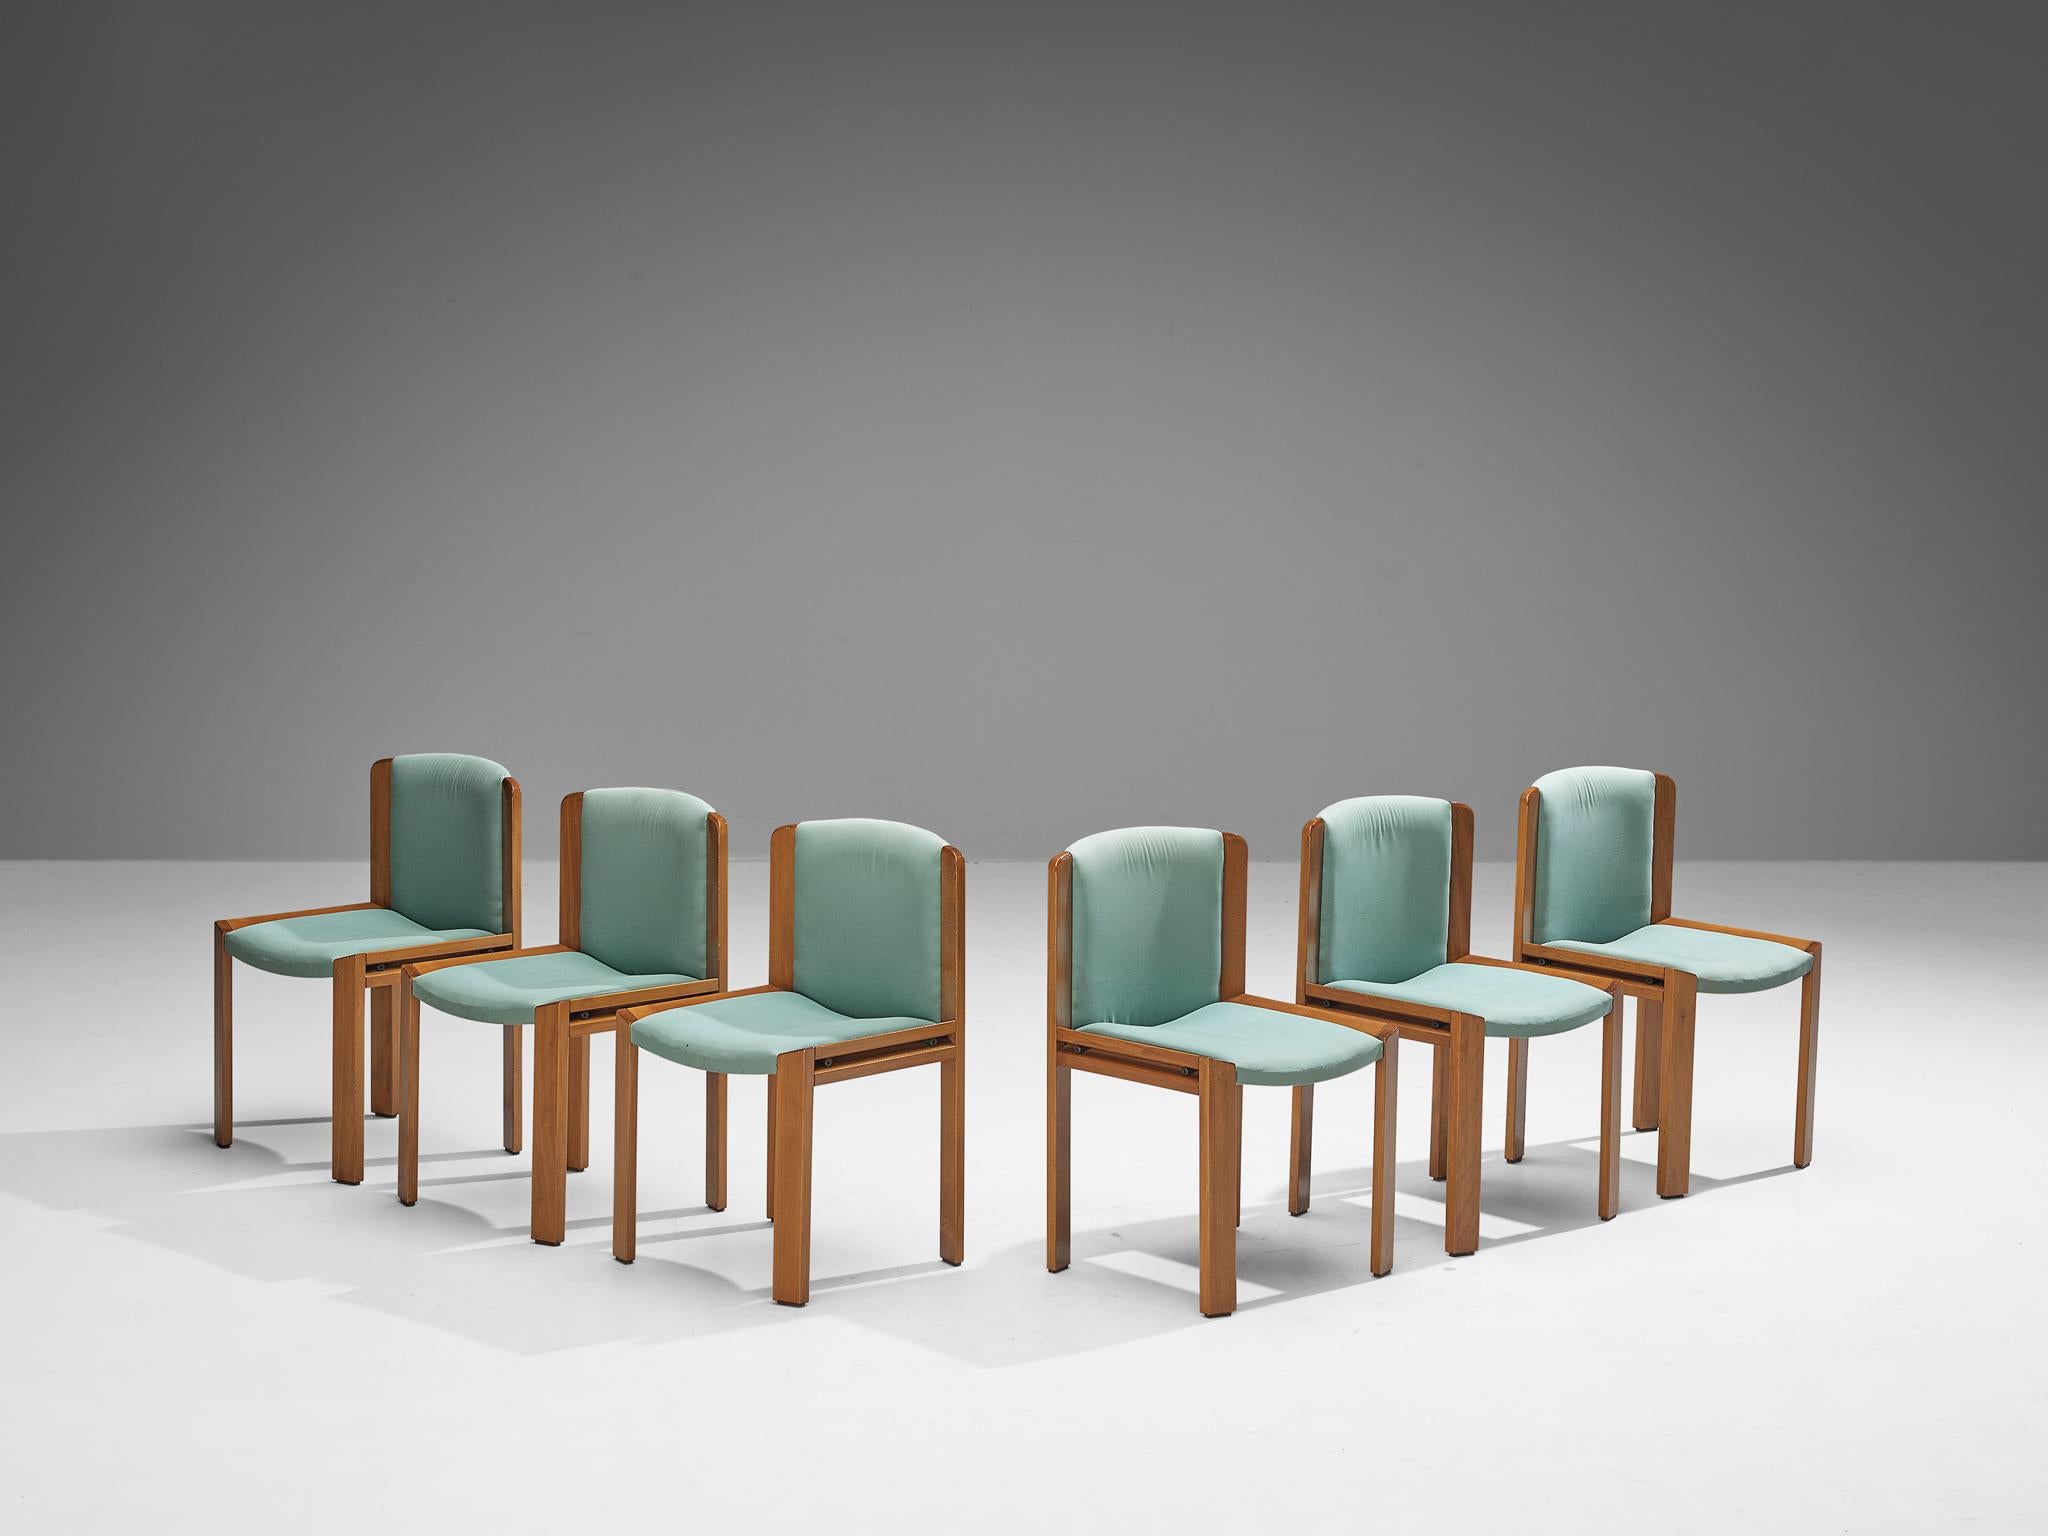 Joe Colombo for Pozzi, set of six dining chairs, model '300', fabric, stained beech, Italy, 1966

In 1966, Joe Colombo crafted a set of six dining chairs known as the ‘300’ model. Colombo prioritized practicality and the needs of the user, and these